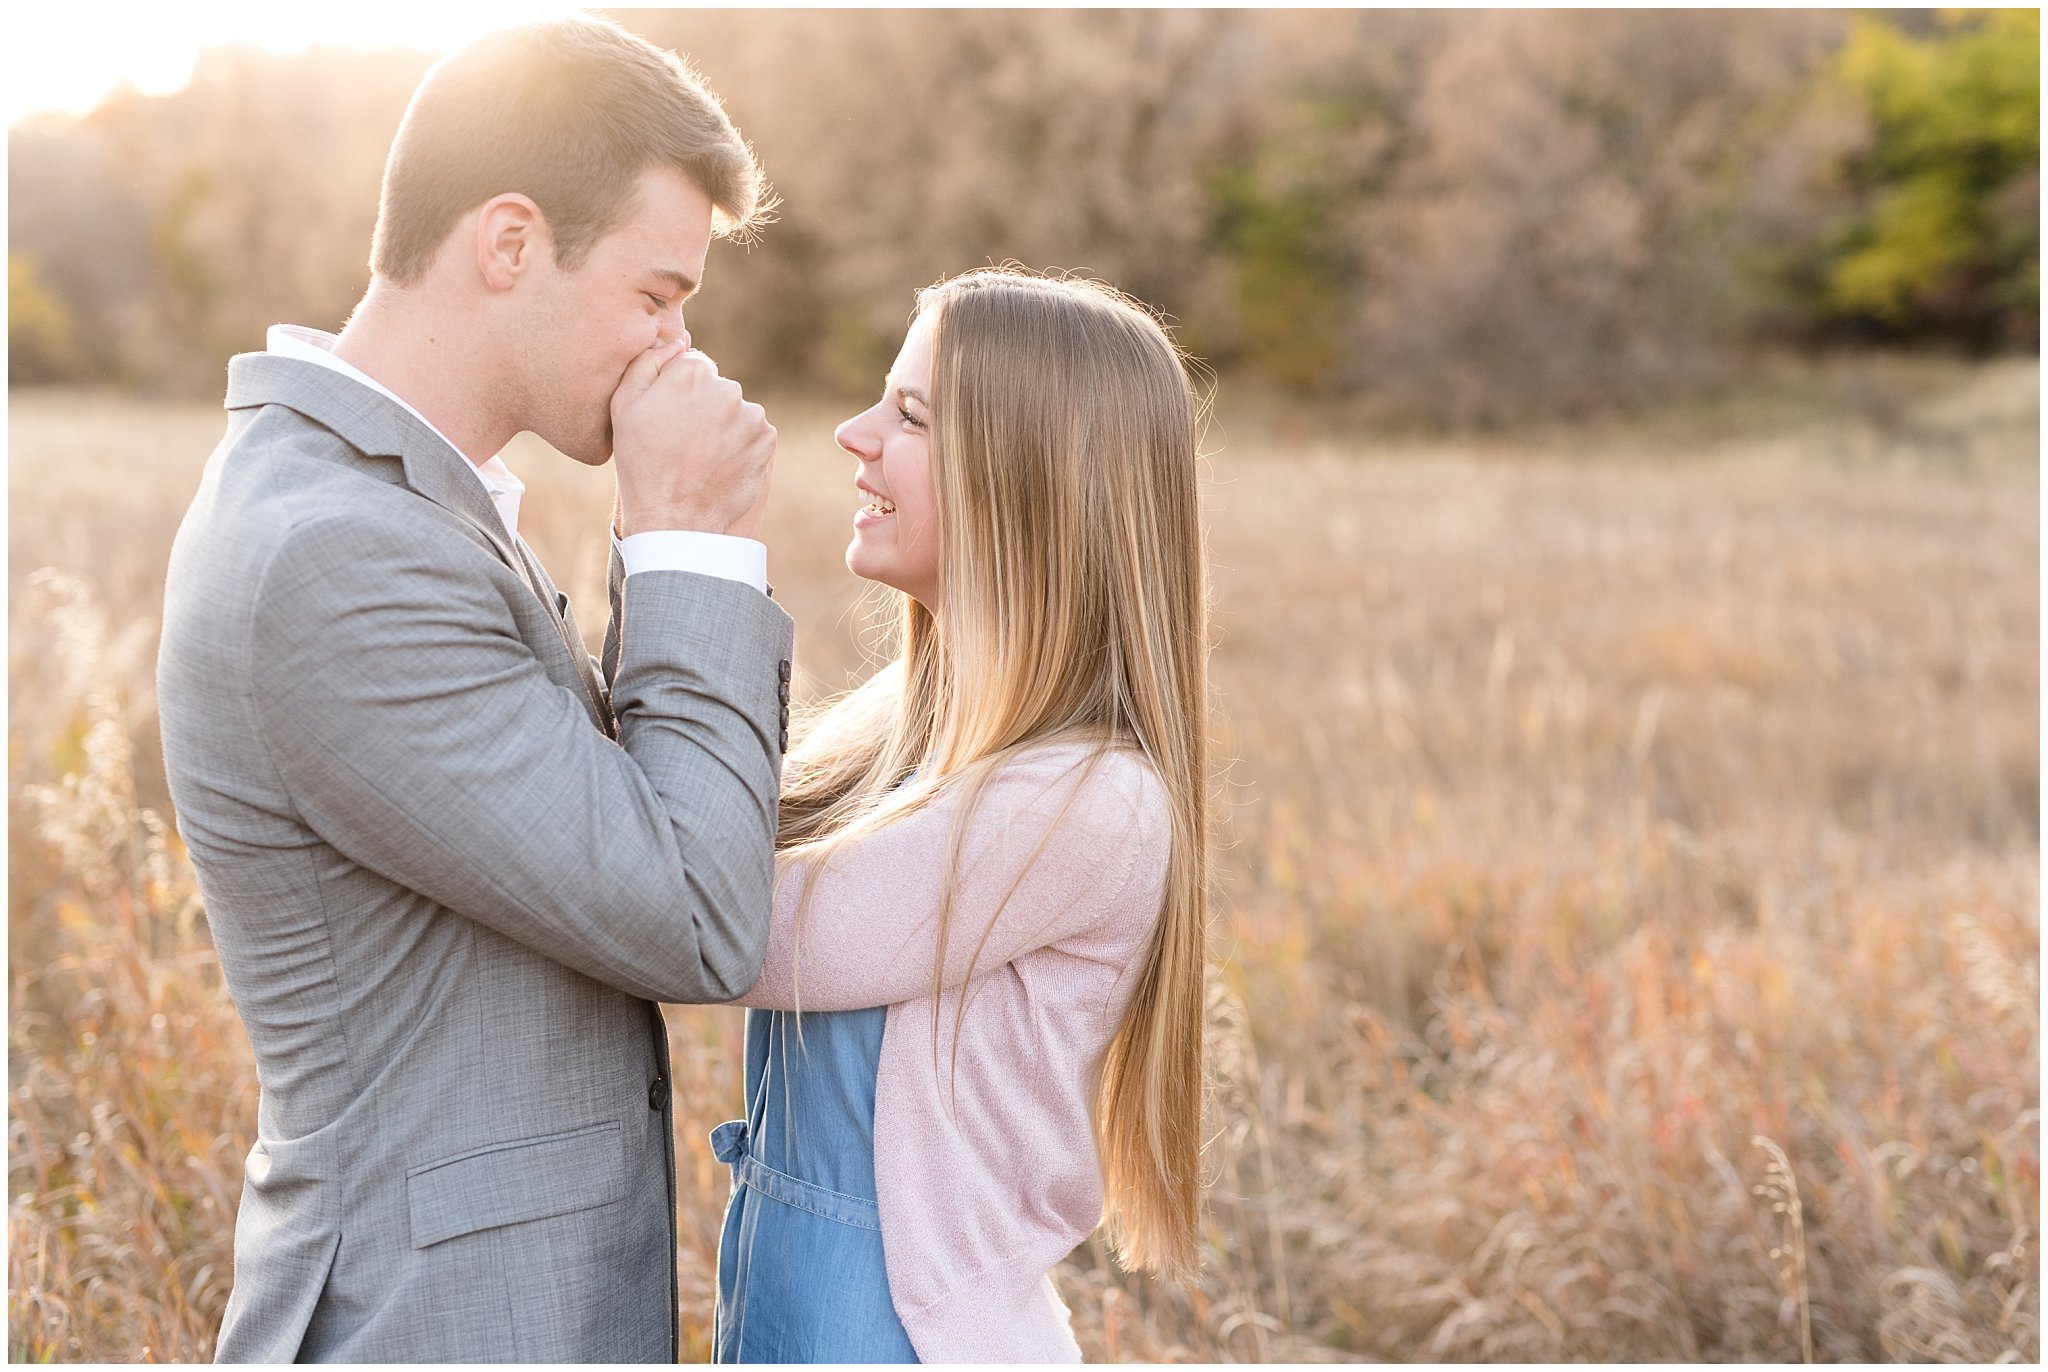 Couple in a field for engagement photos | Utah Wedding Photographers | Jessie and Dallin Photography